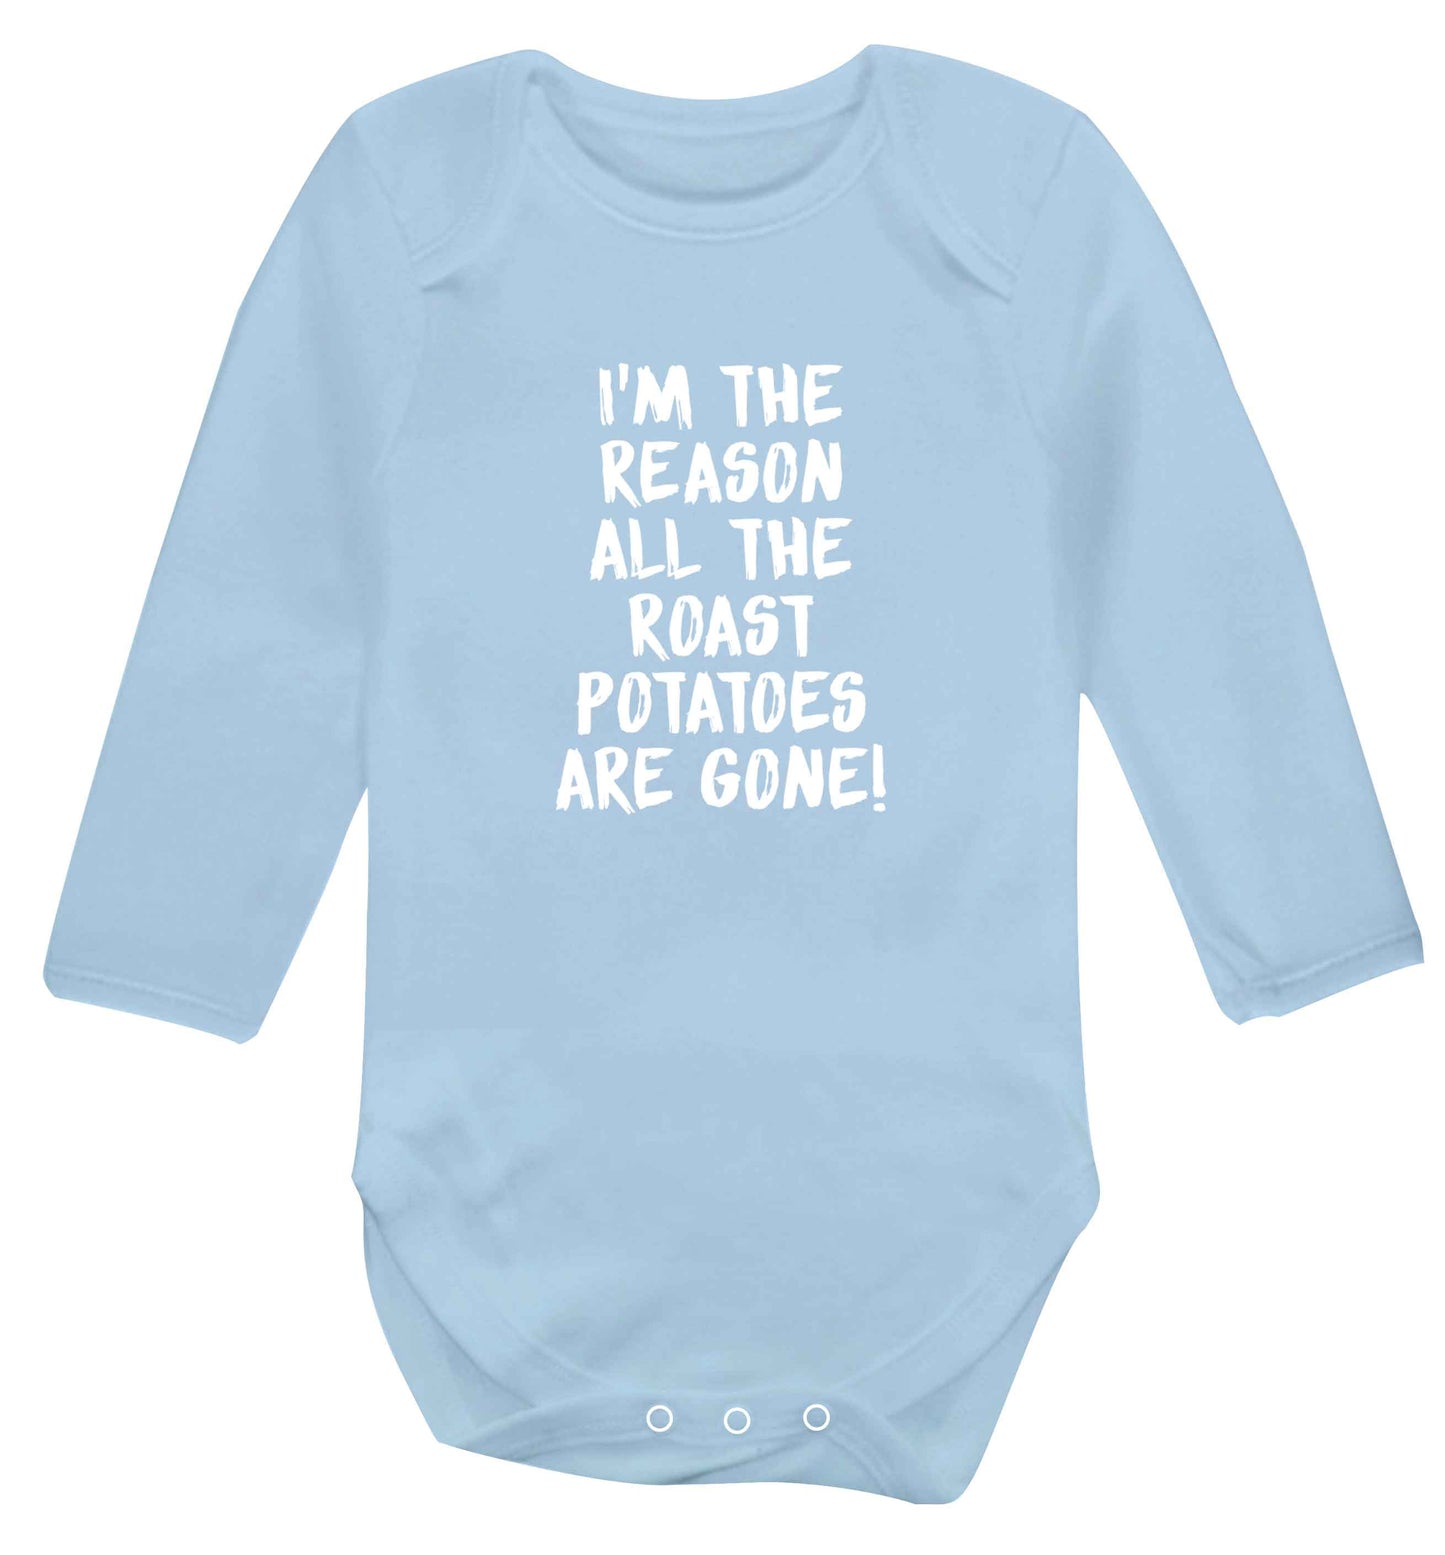 I'm the reason all the roast potatoes are gone baby vest long sleeved pale blue 6-12 months